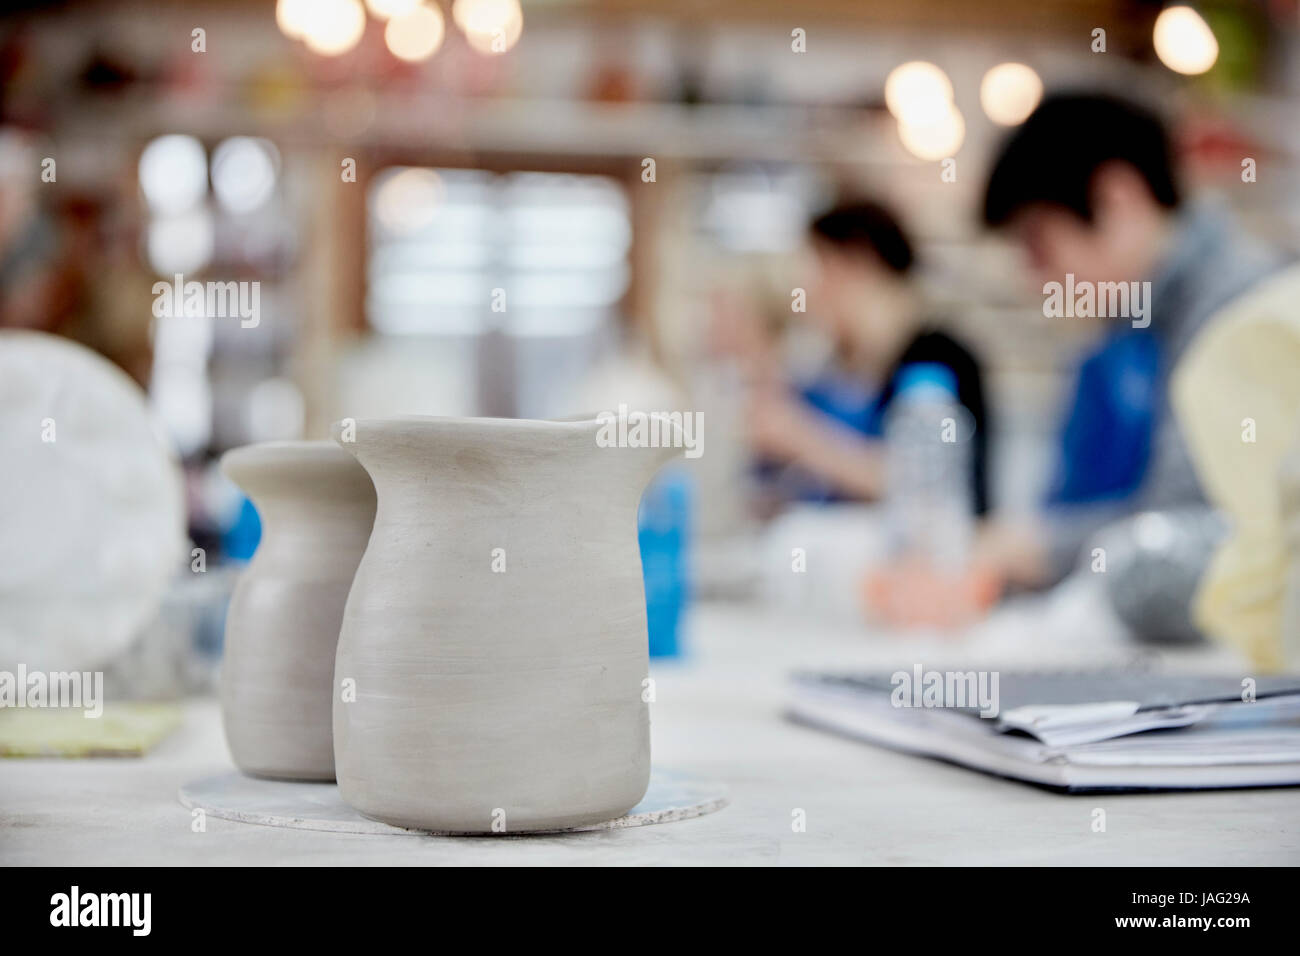 Two clay jugs in the foreground. A ceramics class taking place, people seated at a workbench in a pottery studio. Stock Photo